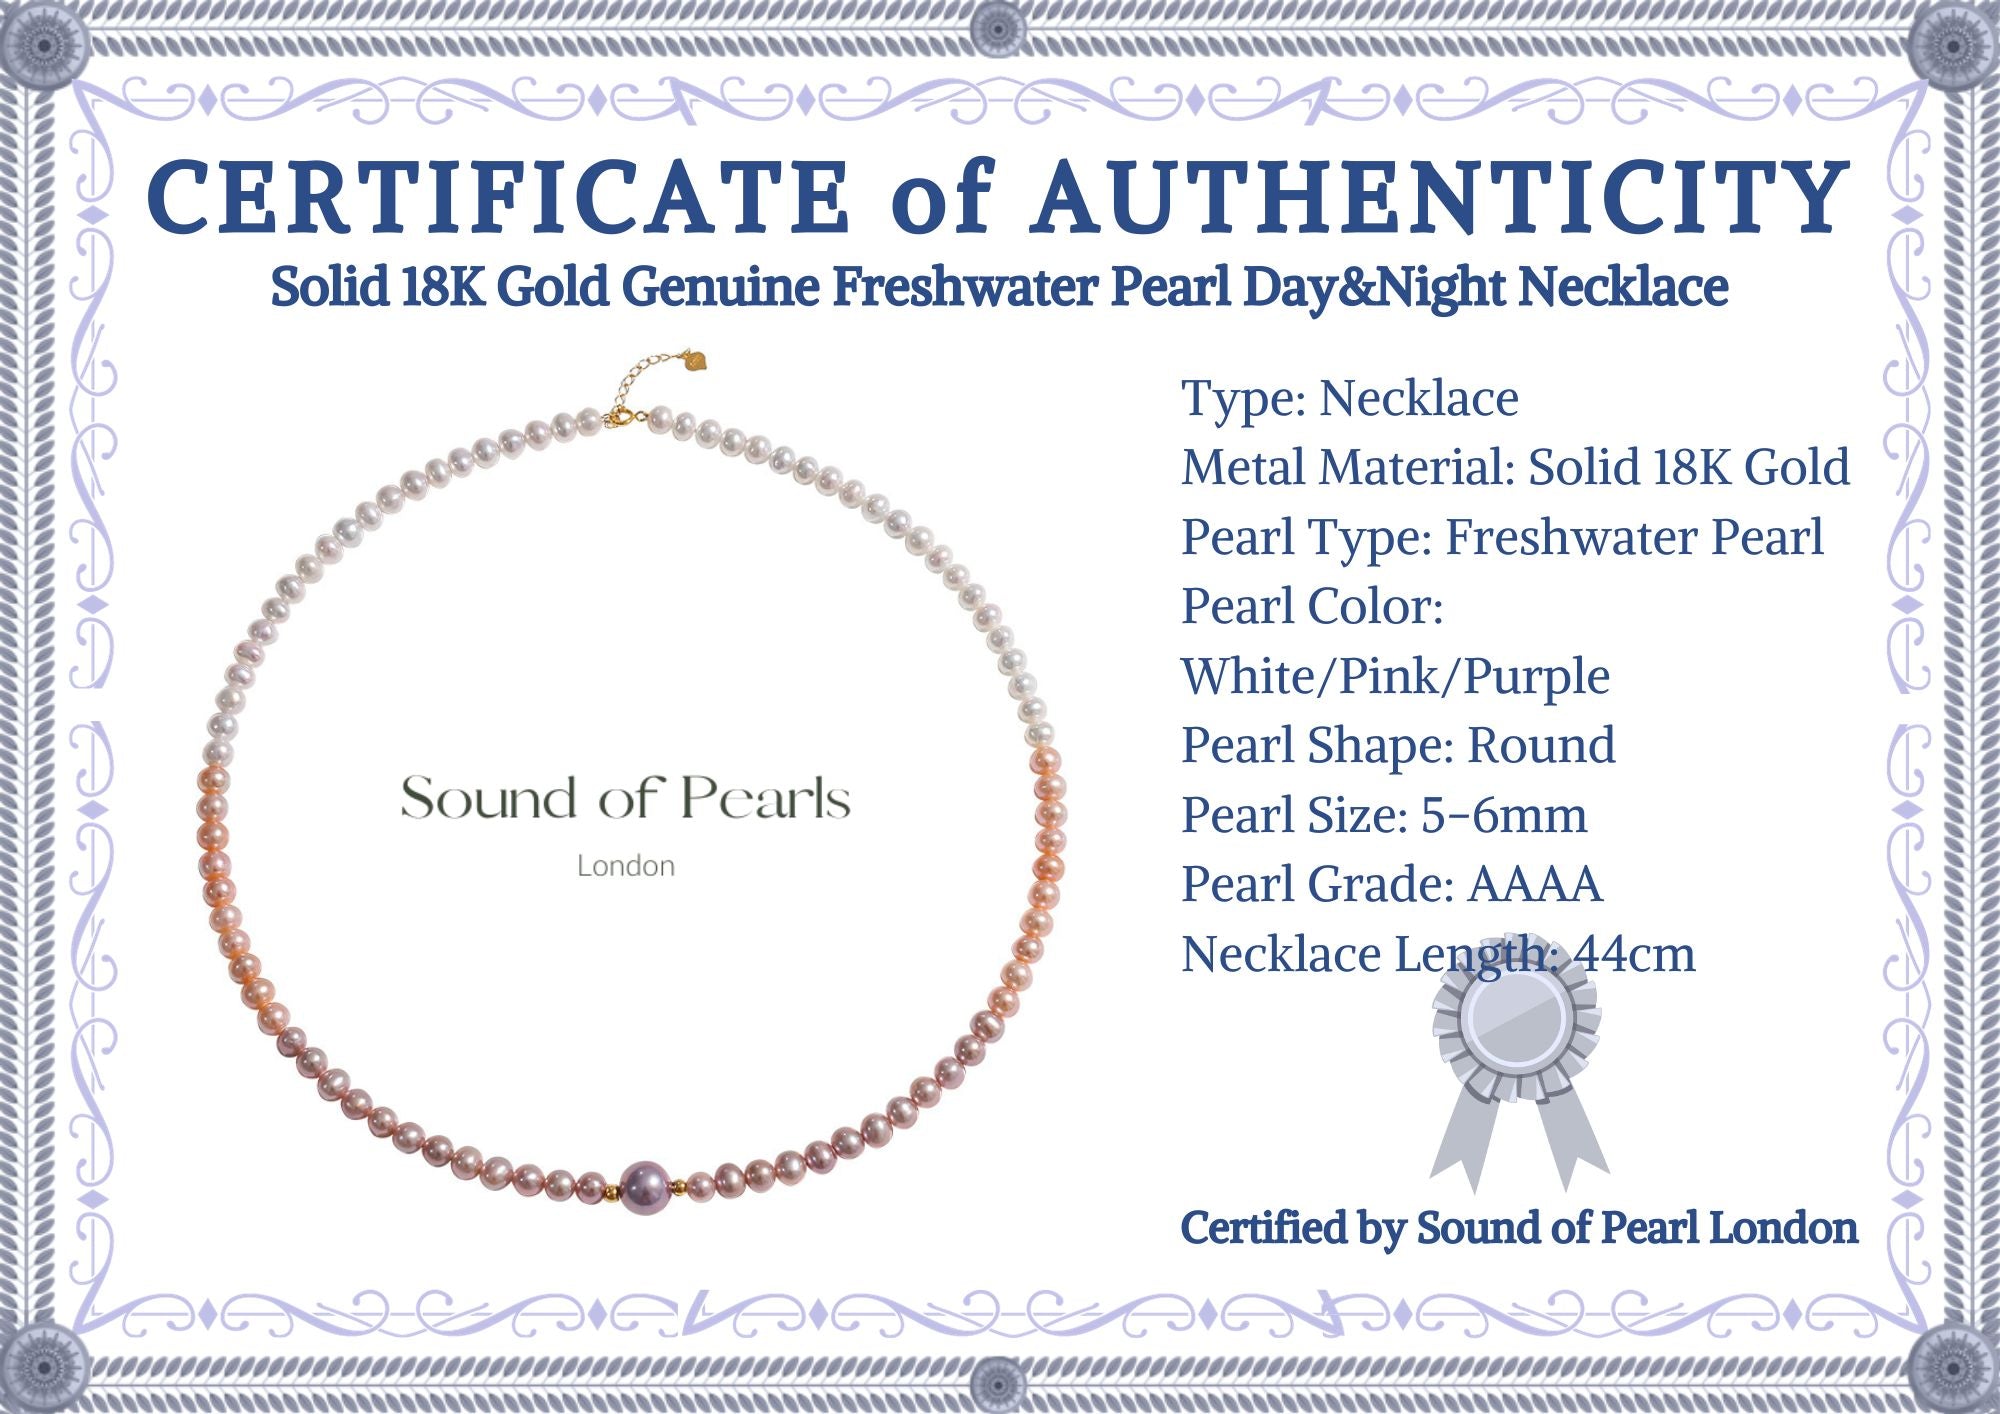 Solid 18K Gold Genuine Freshwater Pearl Day&Night Necklace